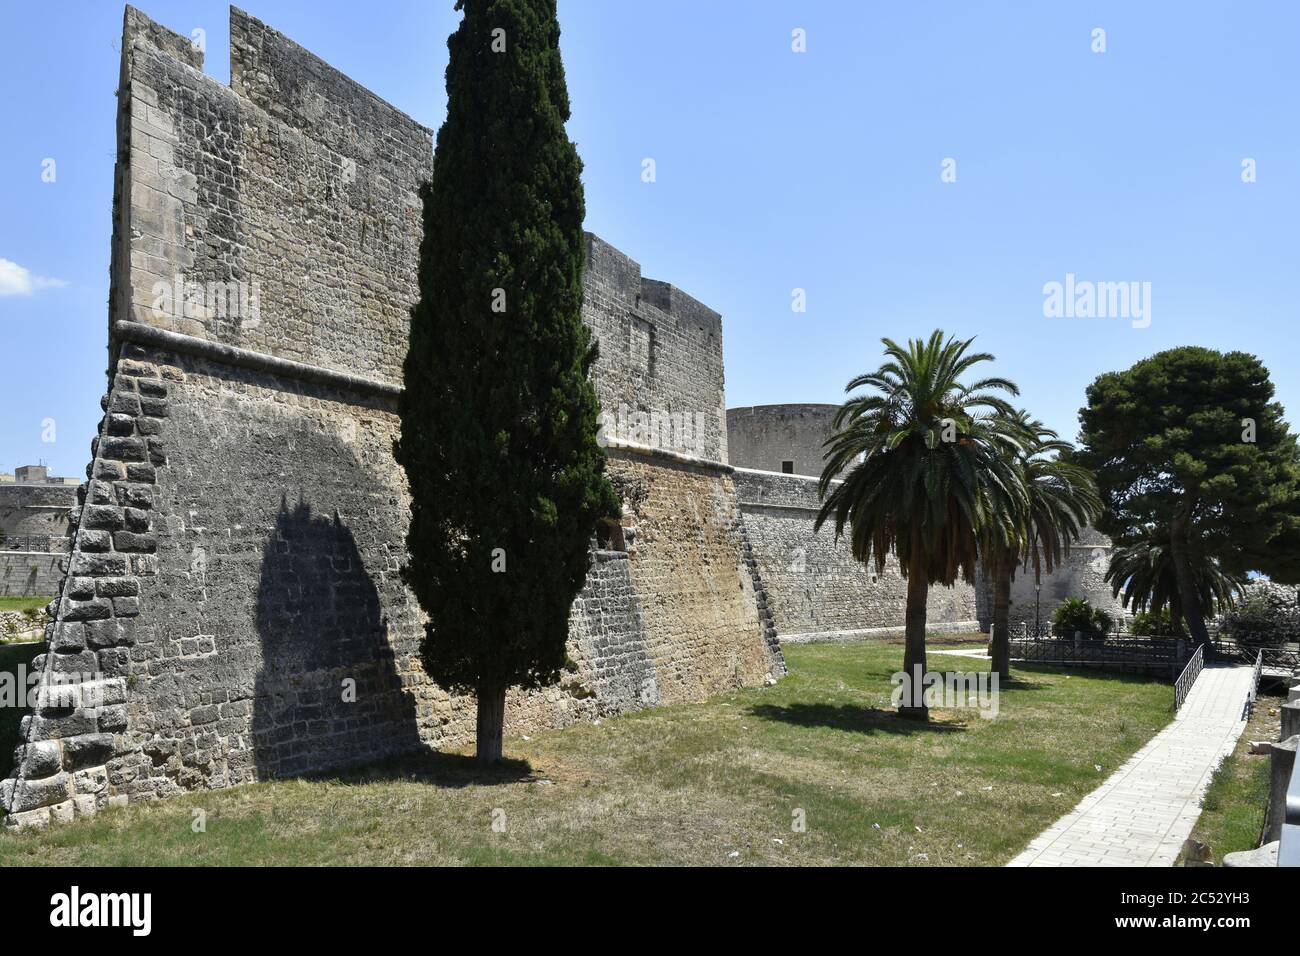 A tower of the medieval castle of Manfredonia, Italy. Stock Photo